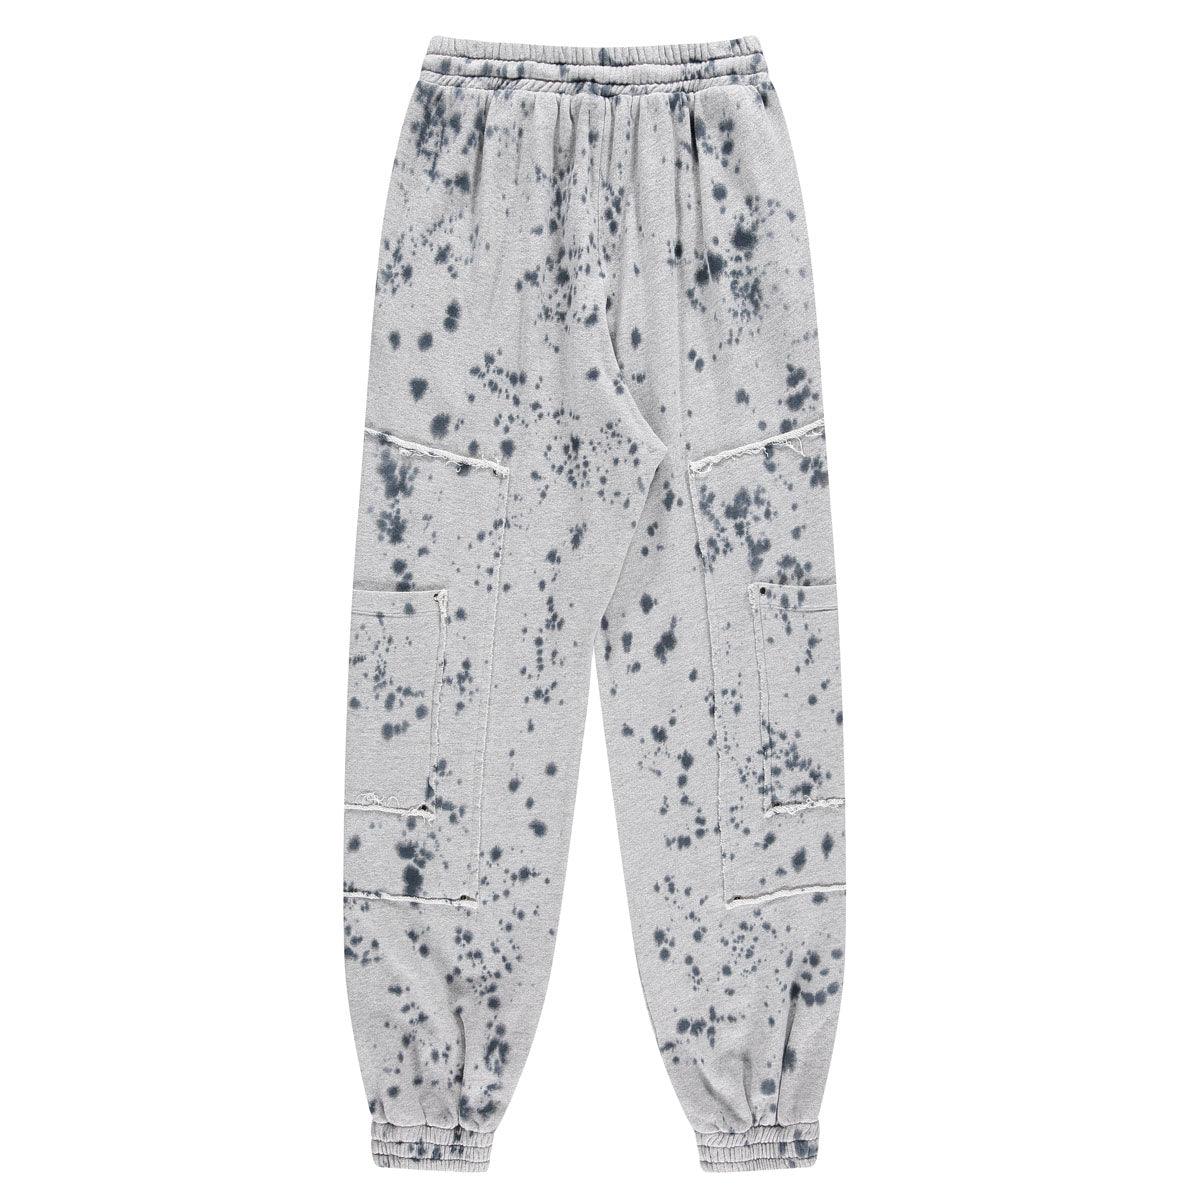 OIL STAINED SWEATPANTS - Strike Oil